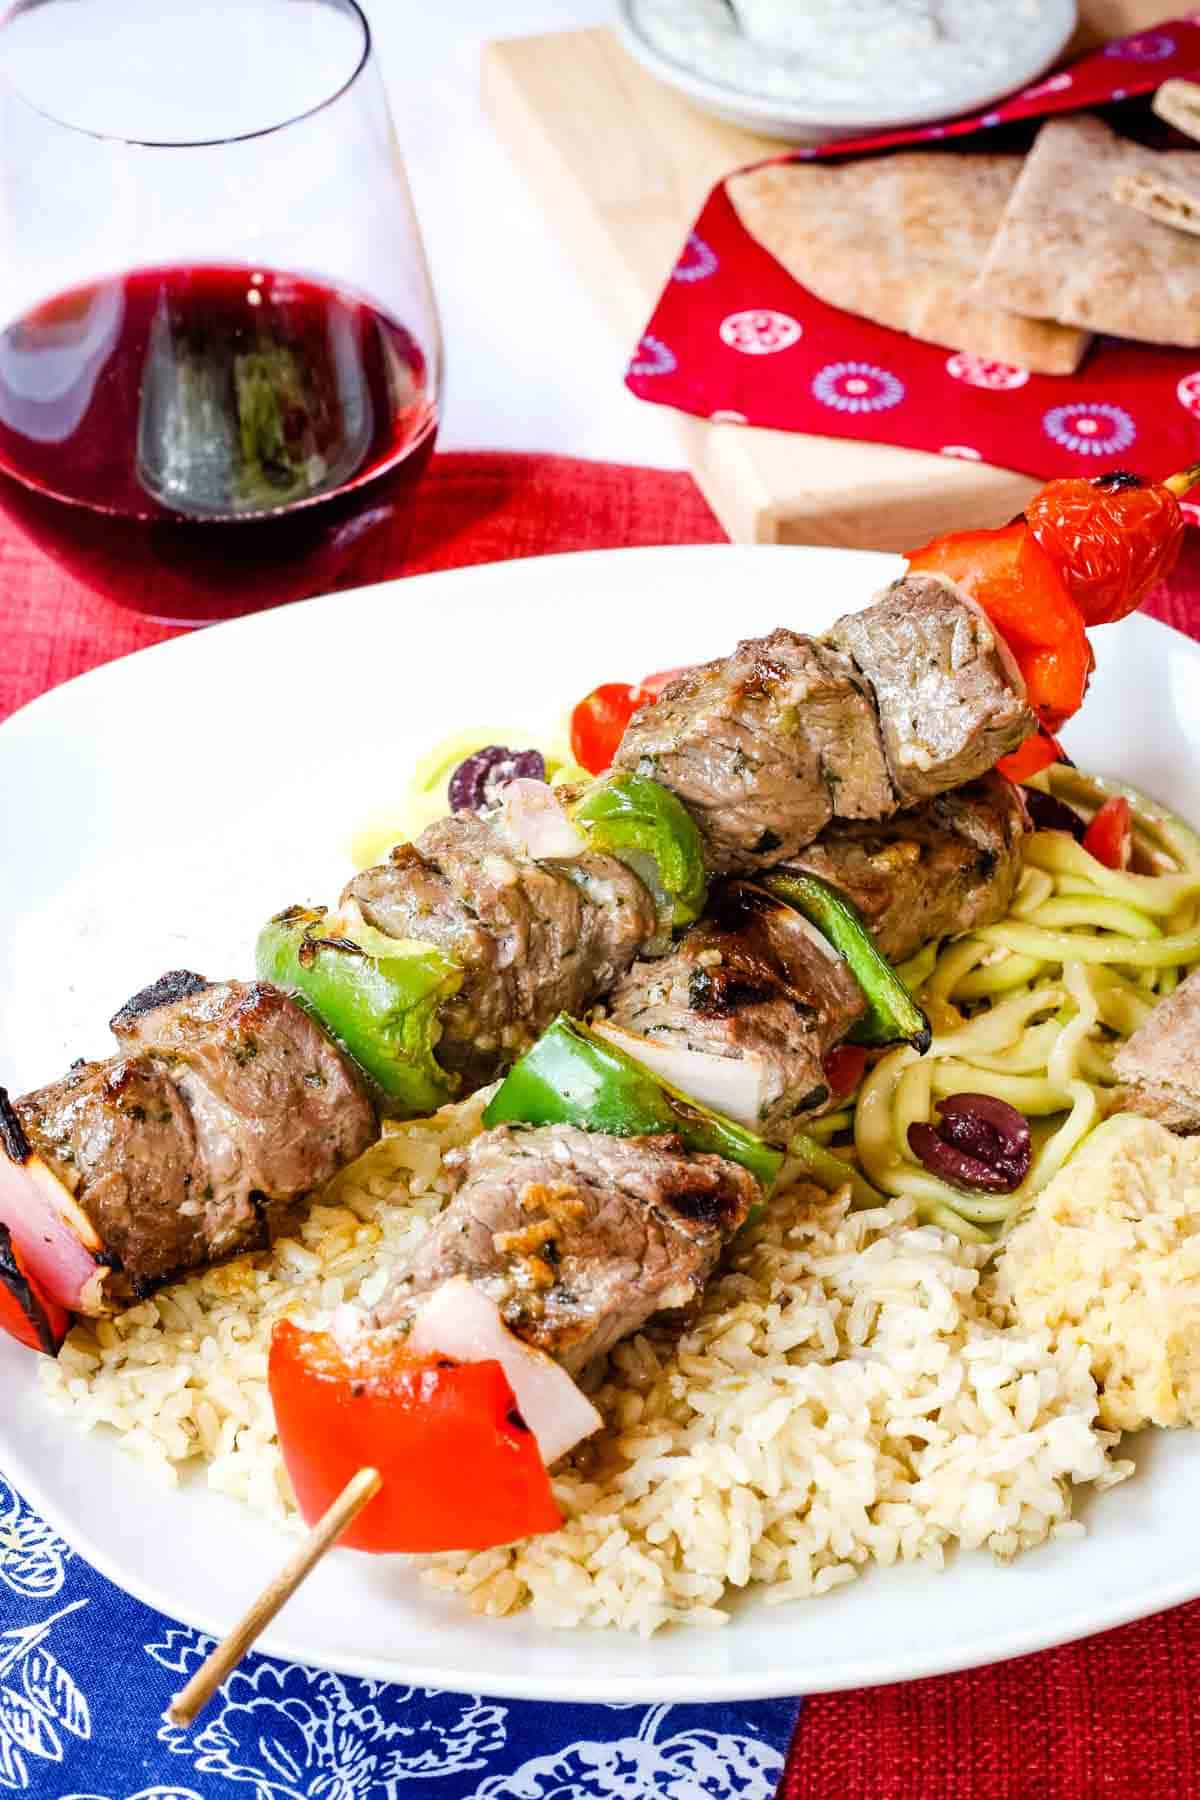 Gettk Beef kabobs with peppers an onions served over rice next to a glass of wine.